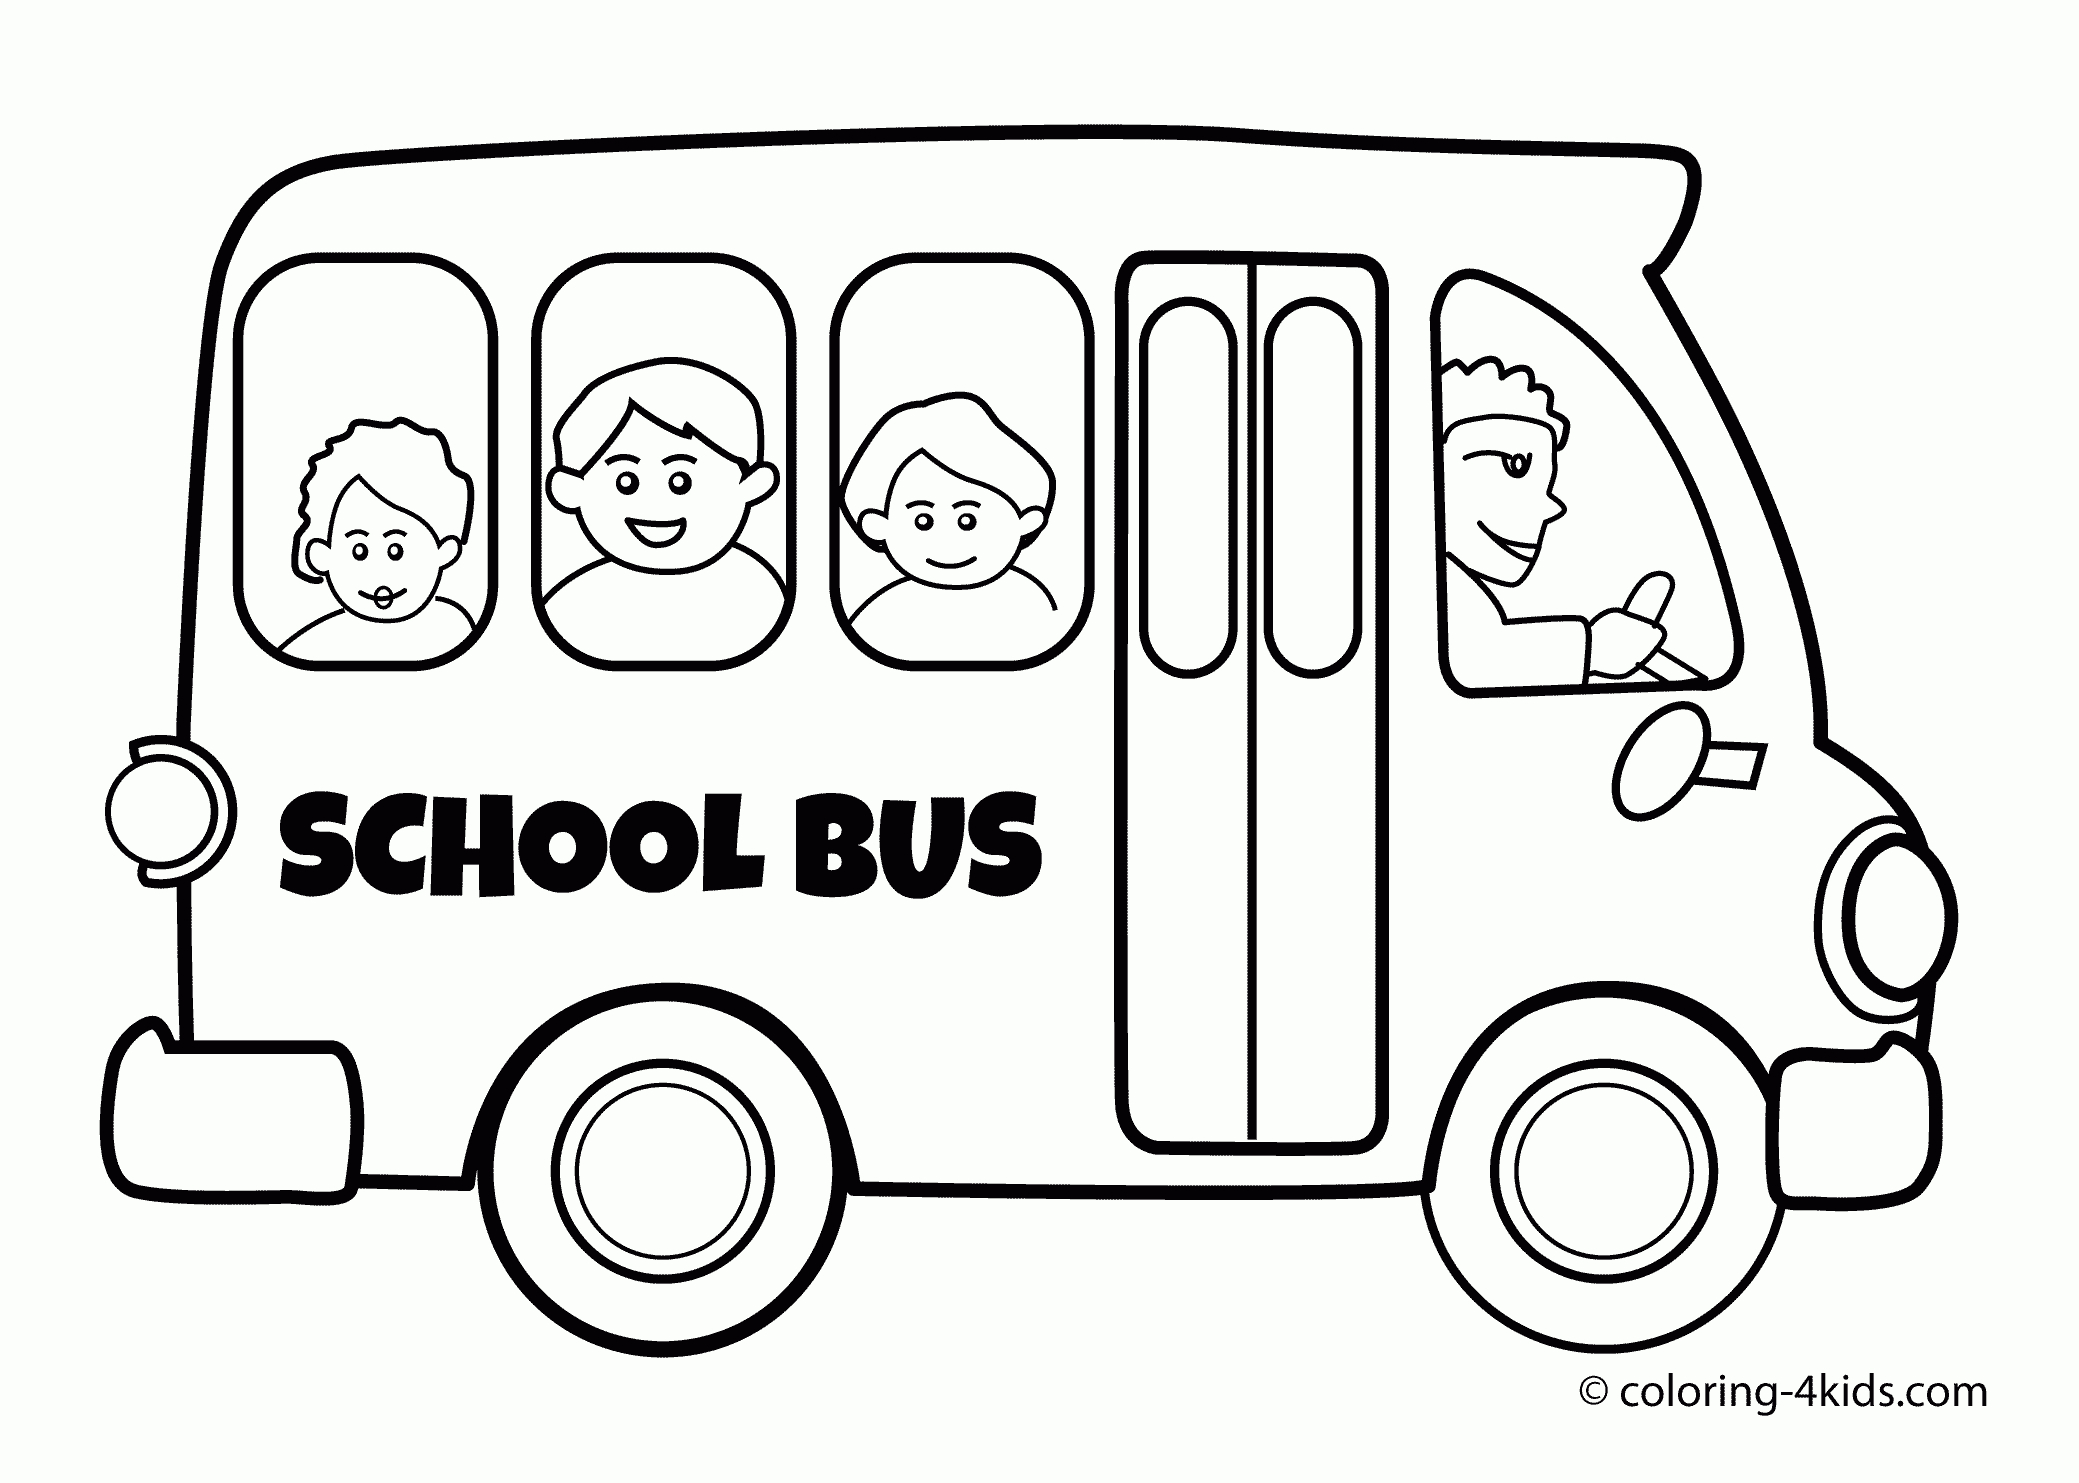 School Bus Transportation Coloring Pages For Kids, Printable - Free Printable School Bus Template